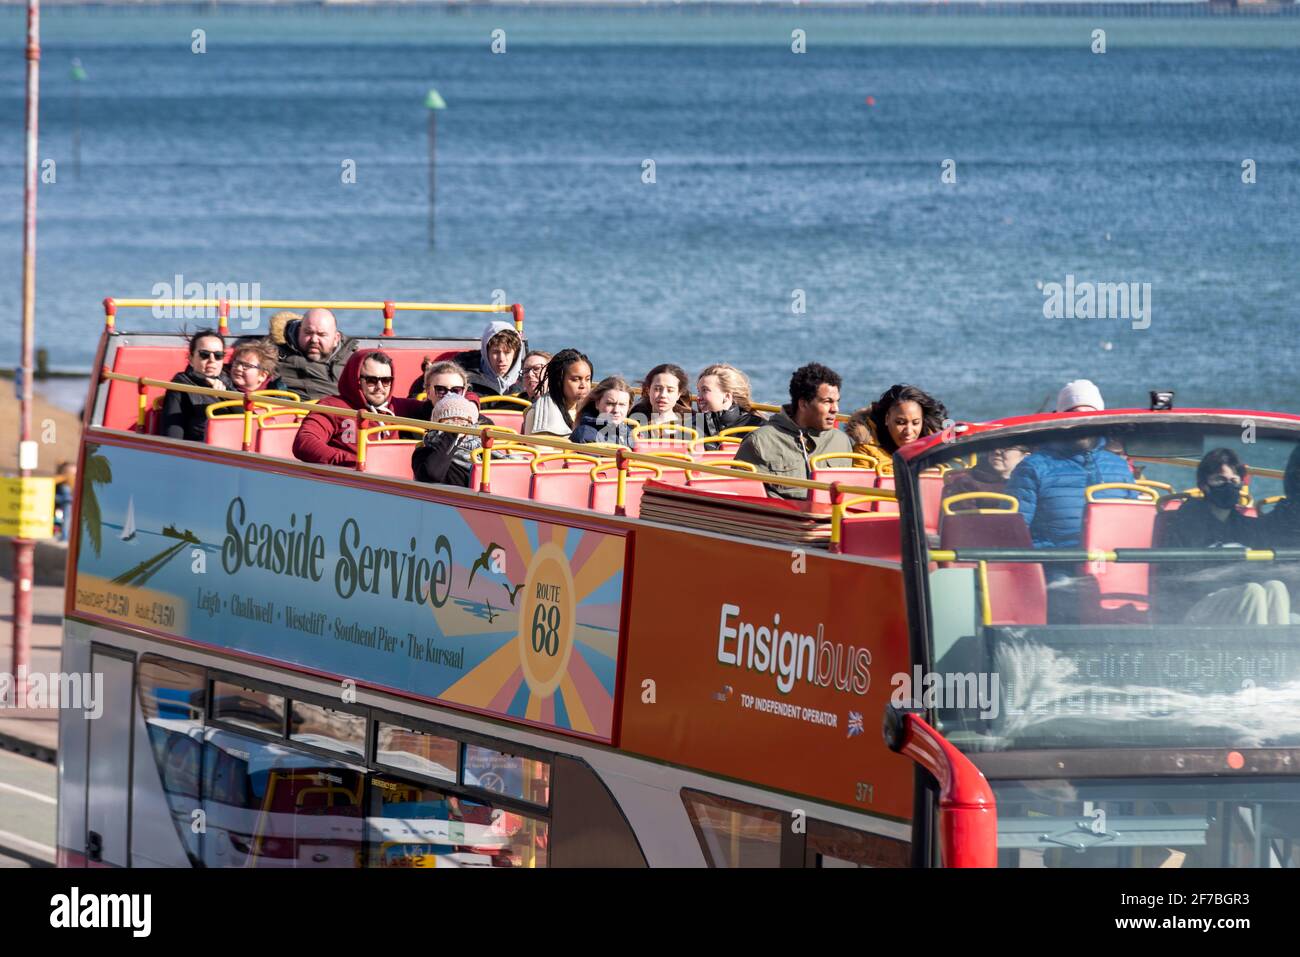 Passengers on the top deck of an Ensignbus open top bus ride in Southend on Sea, Essex, UK, on Easter bank holiday Monday during COVID 19 lockdown Stock Photo